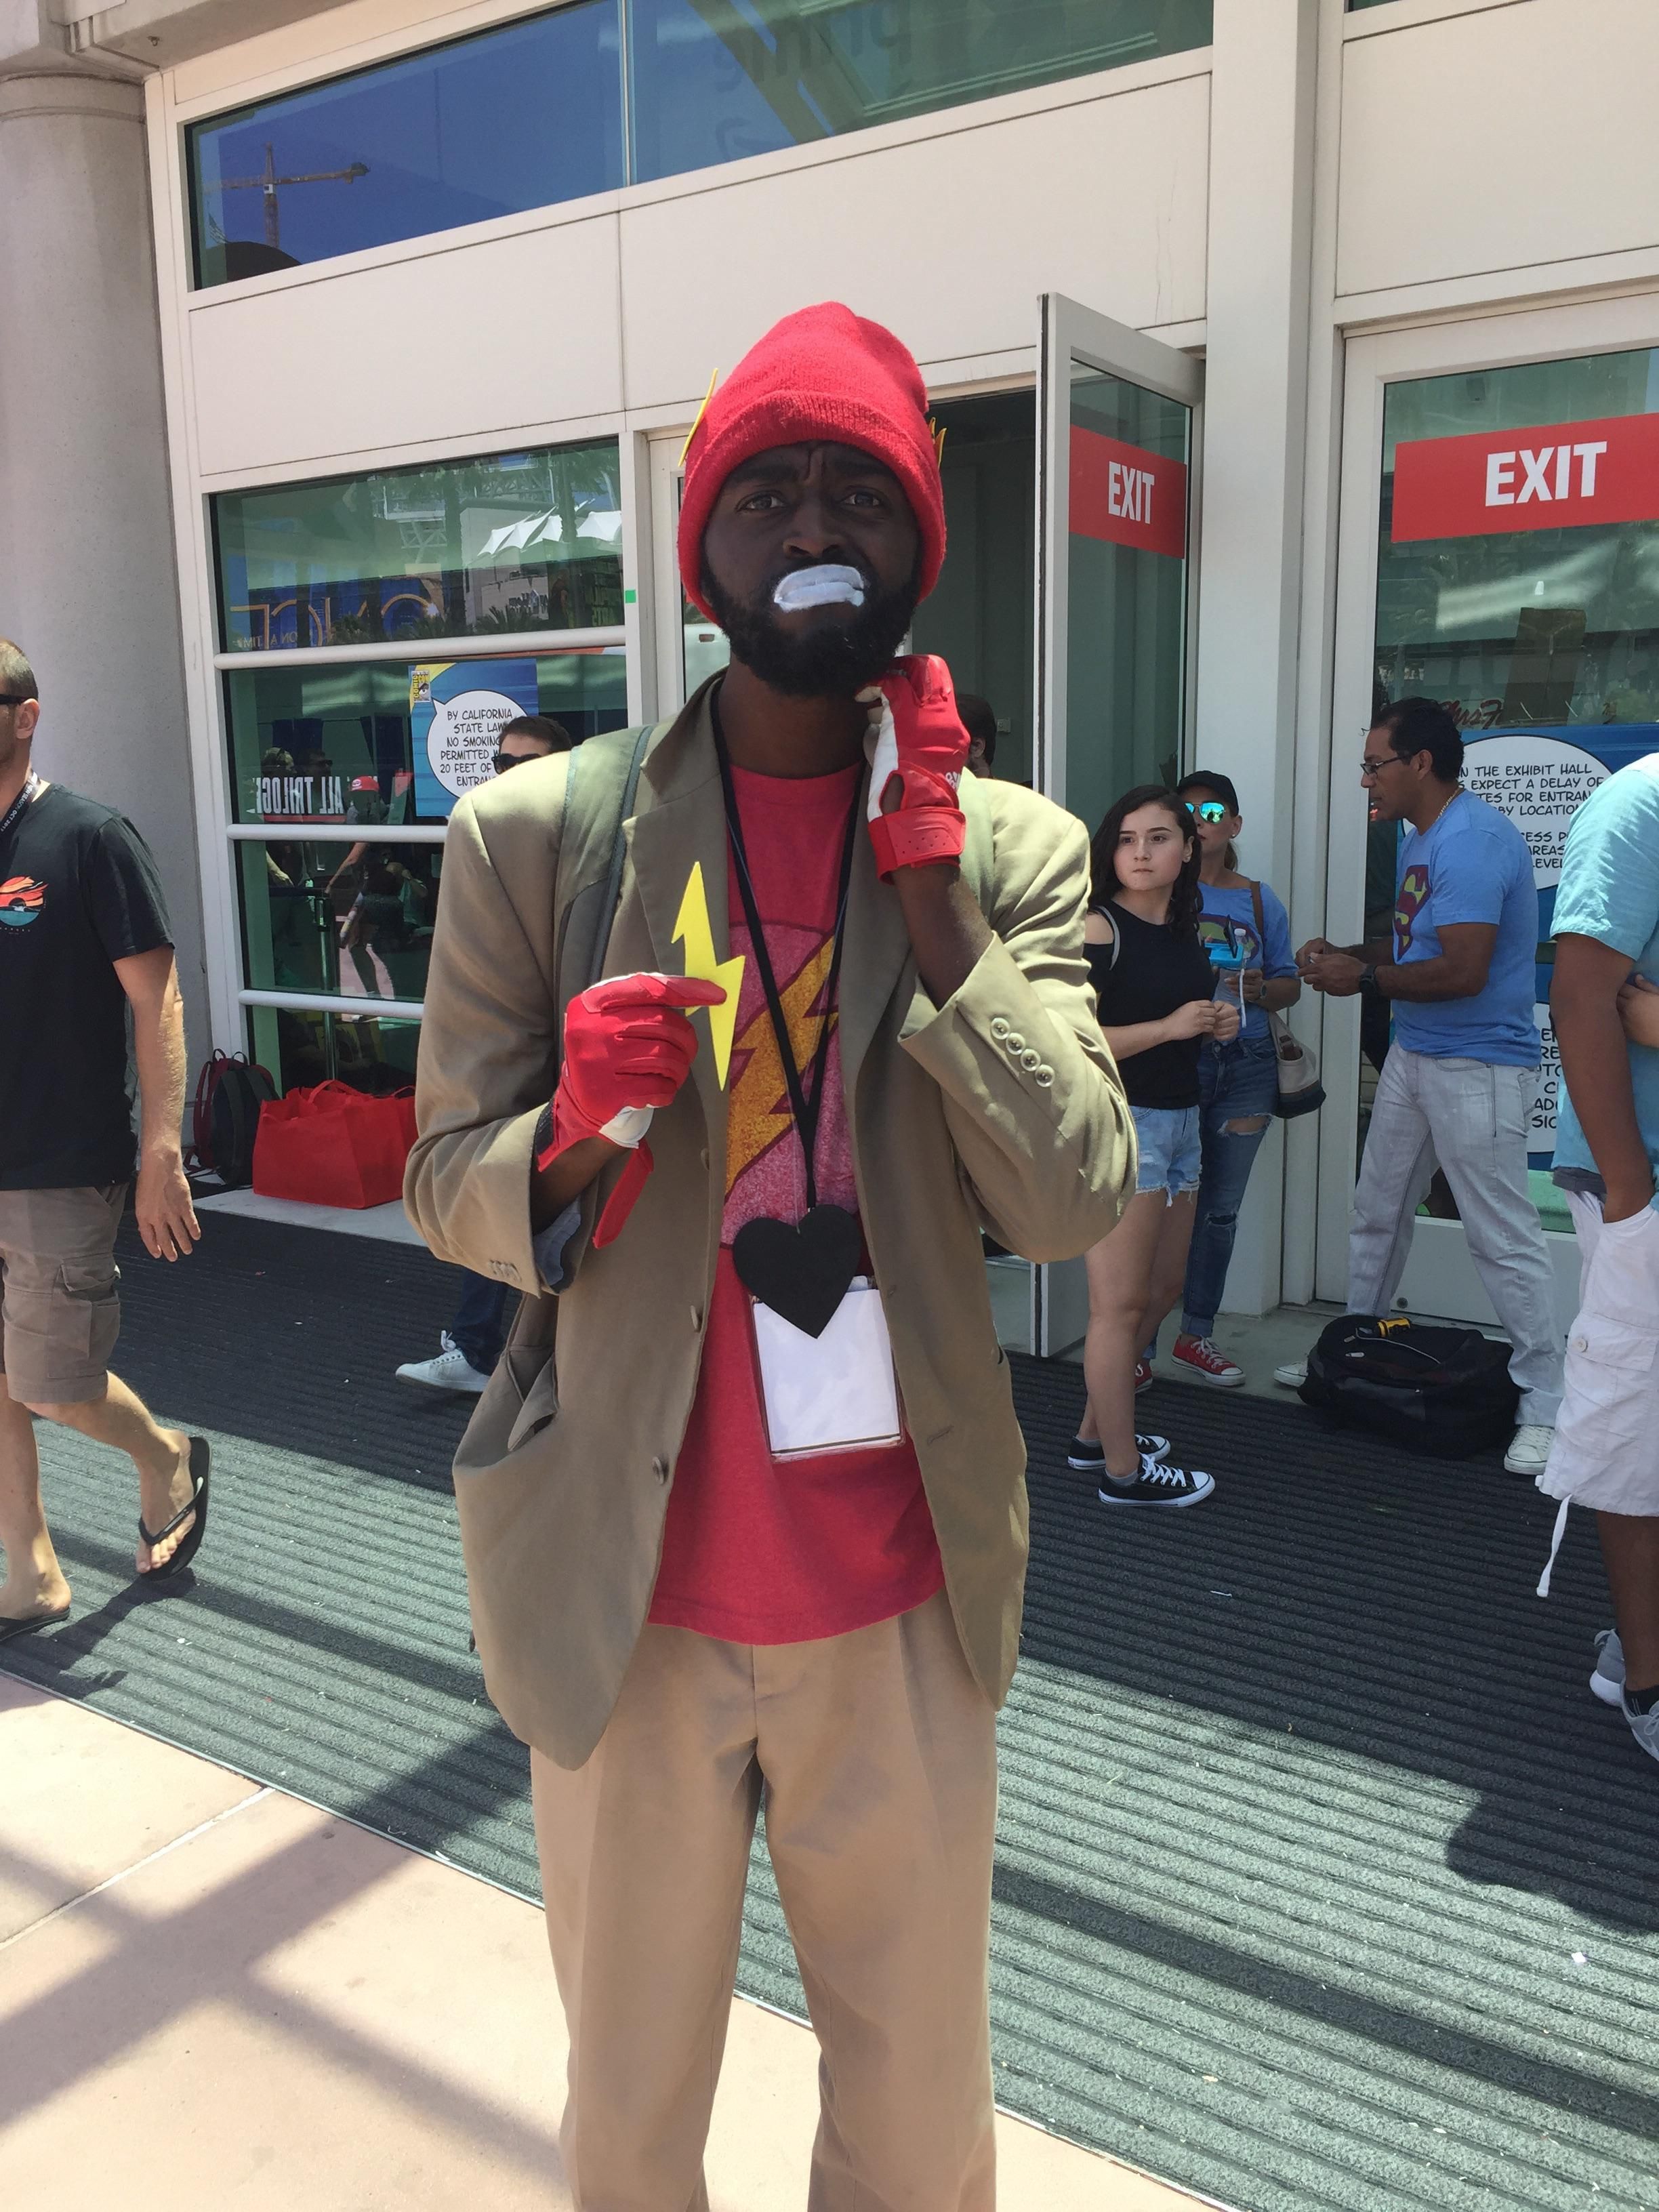 I found the best cosplay at comic con